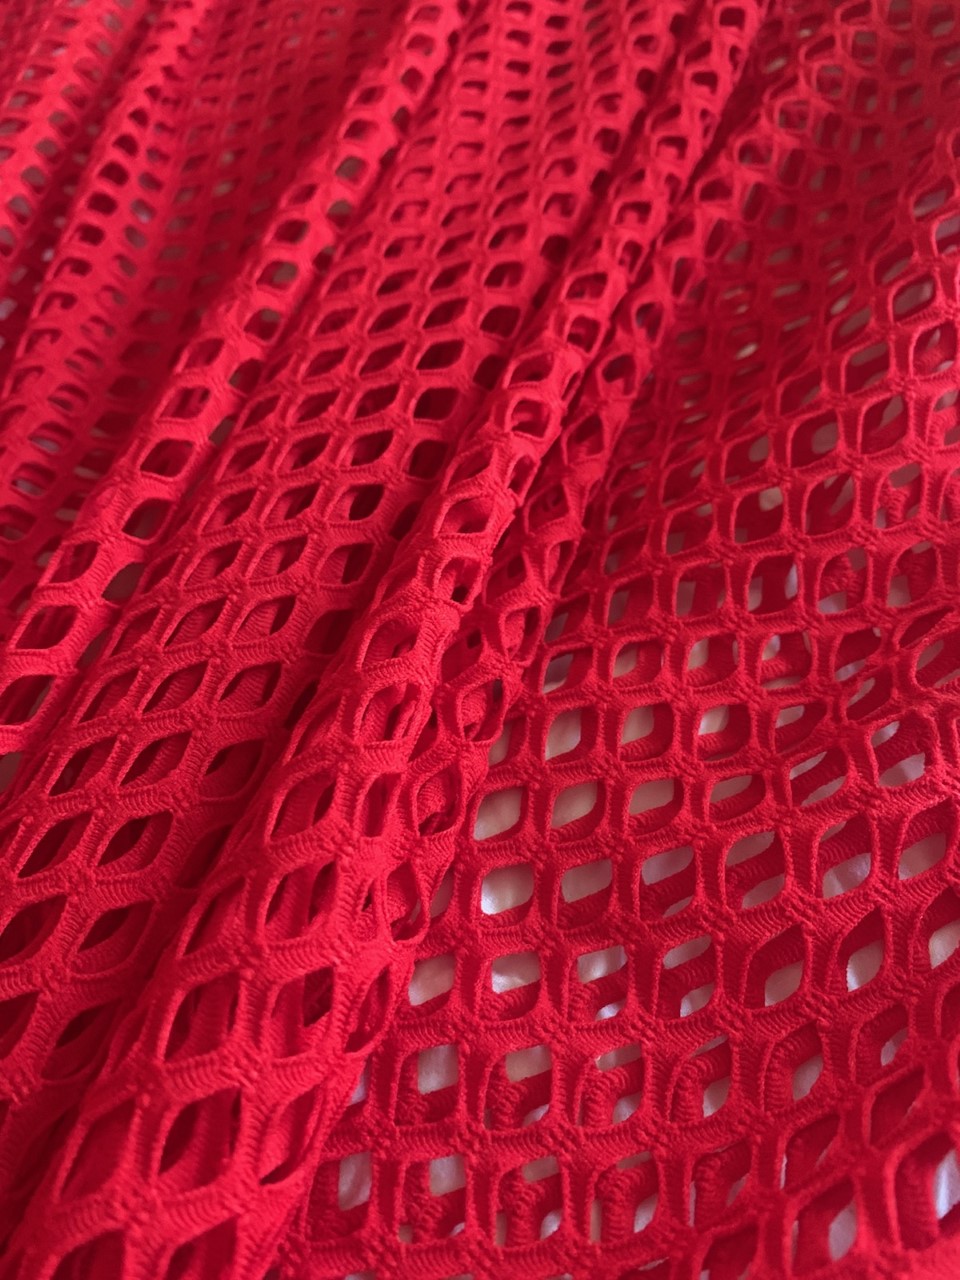 58" Red Poly Mesh Fabric BTY 75% Poly, 17% Nylon, 8% Spandex